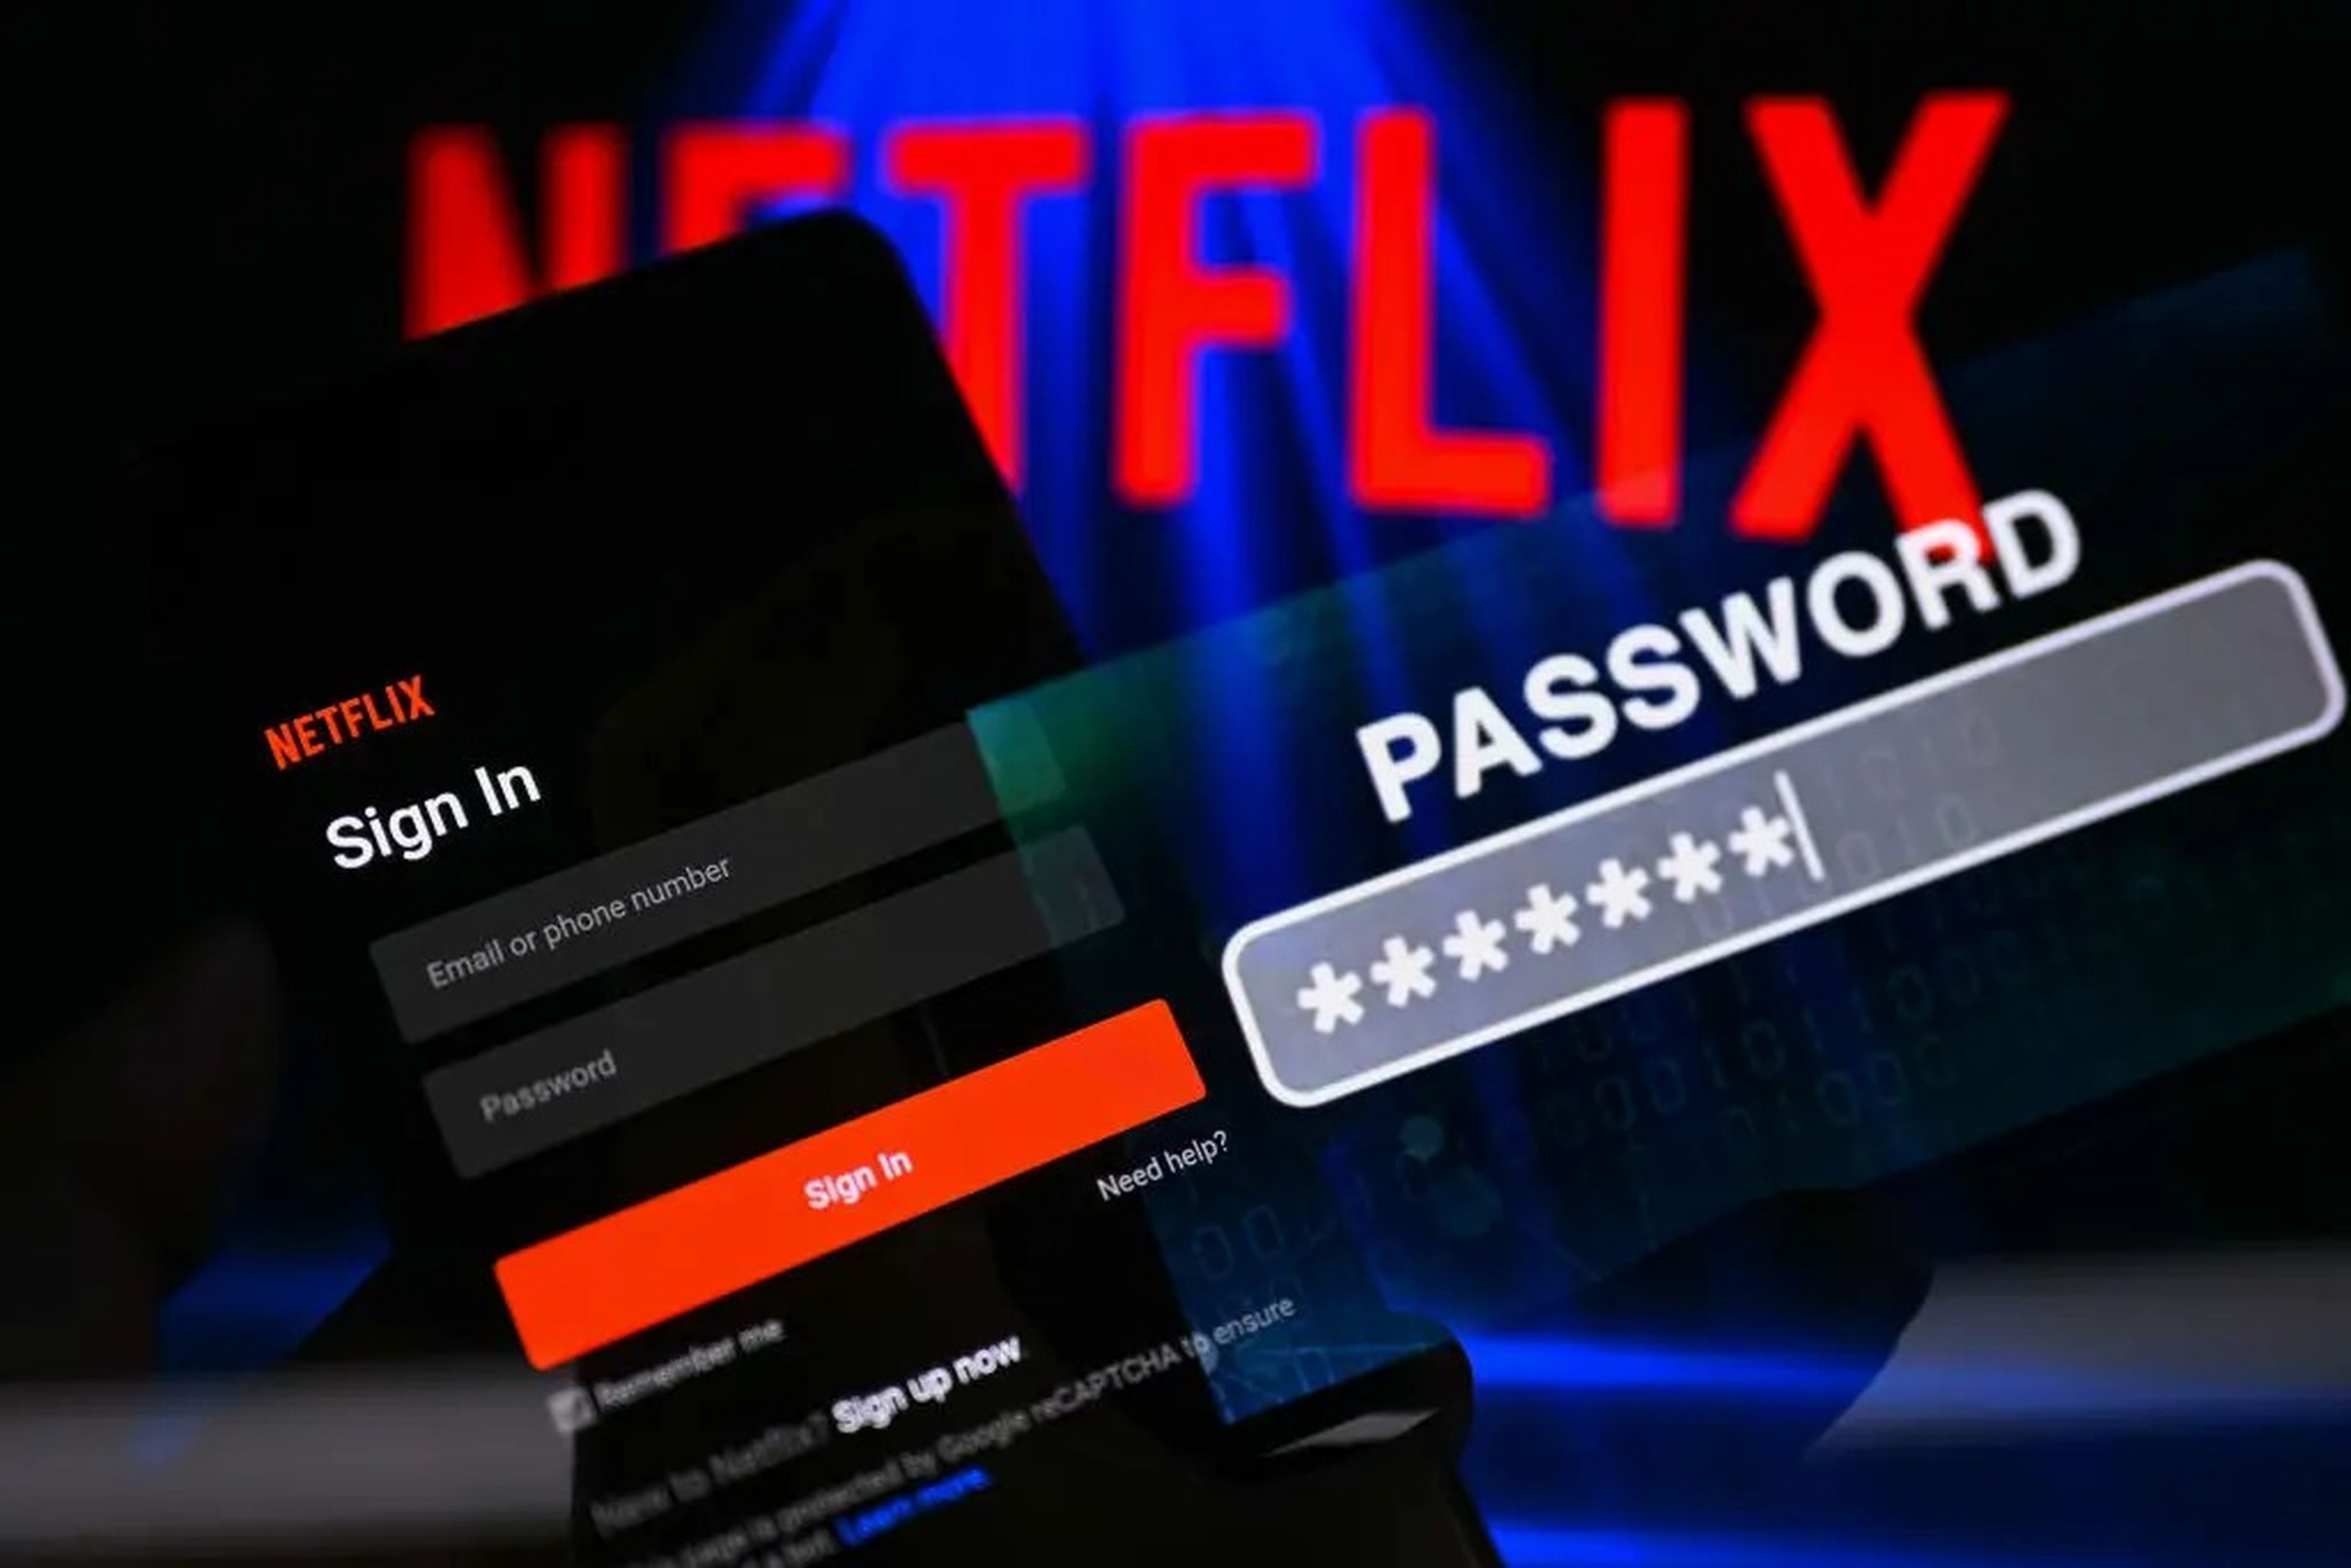 A close up of a phone displaying the sign-in page to Netflix, with the company logo in the background.